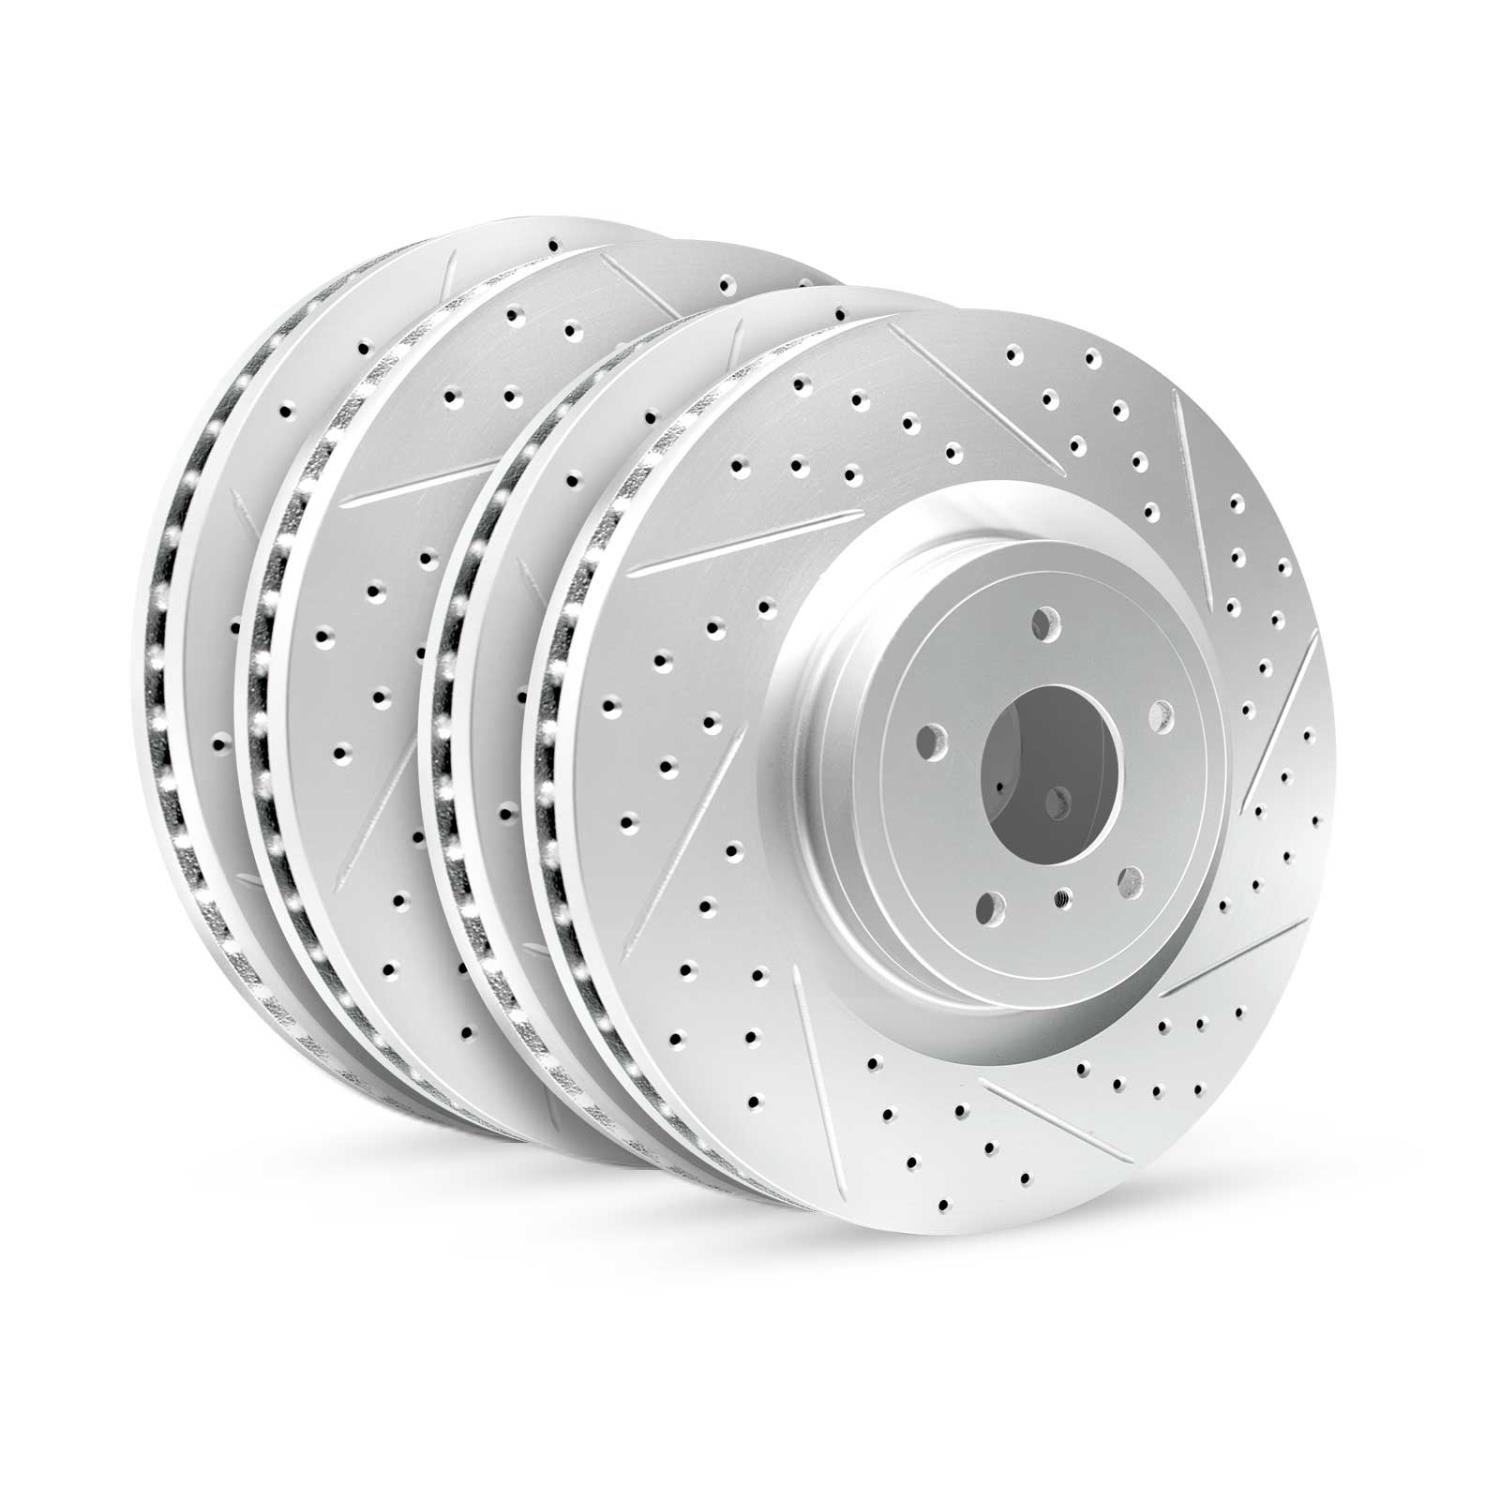 GEO-Carbon Drilled/Slotted Rotors, 1994-2004 Ford/Mazda,